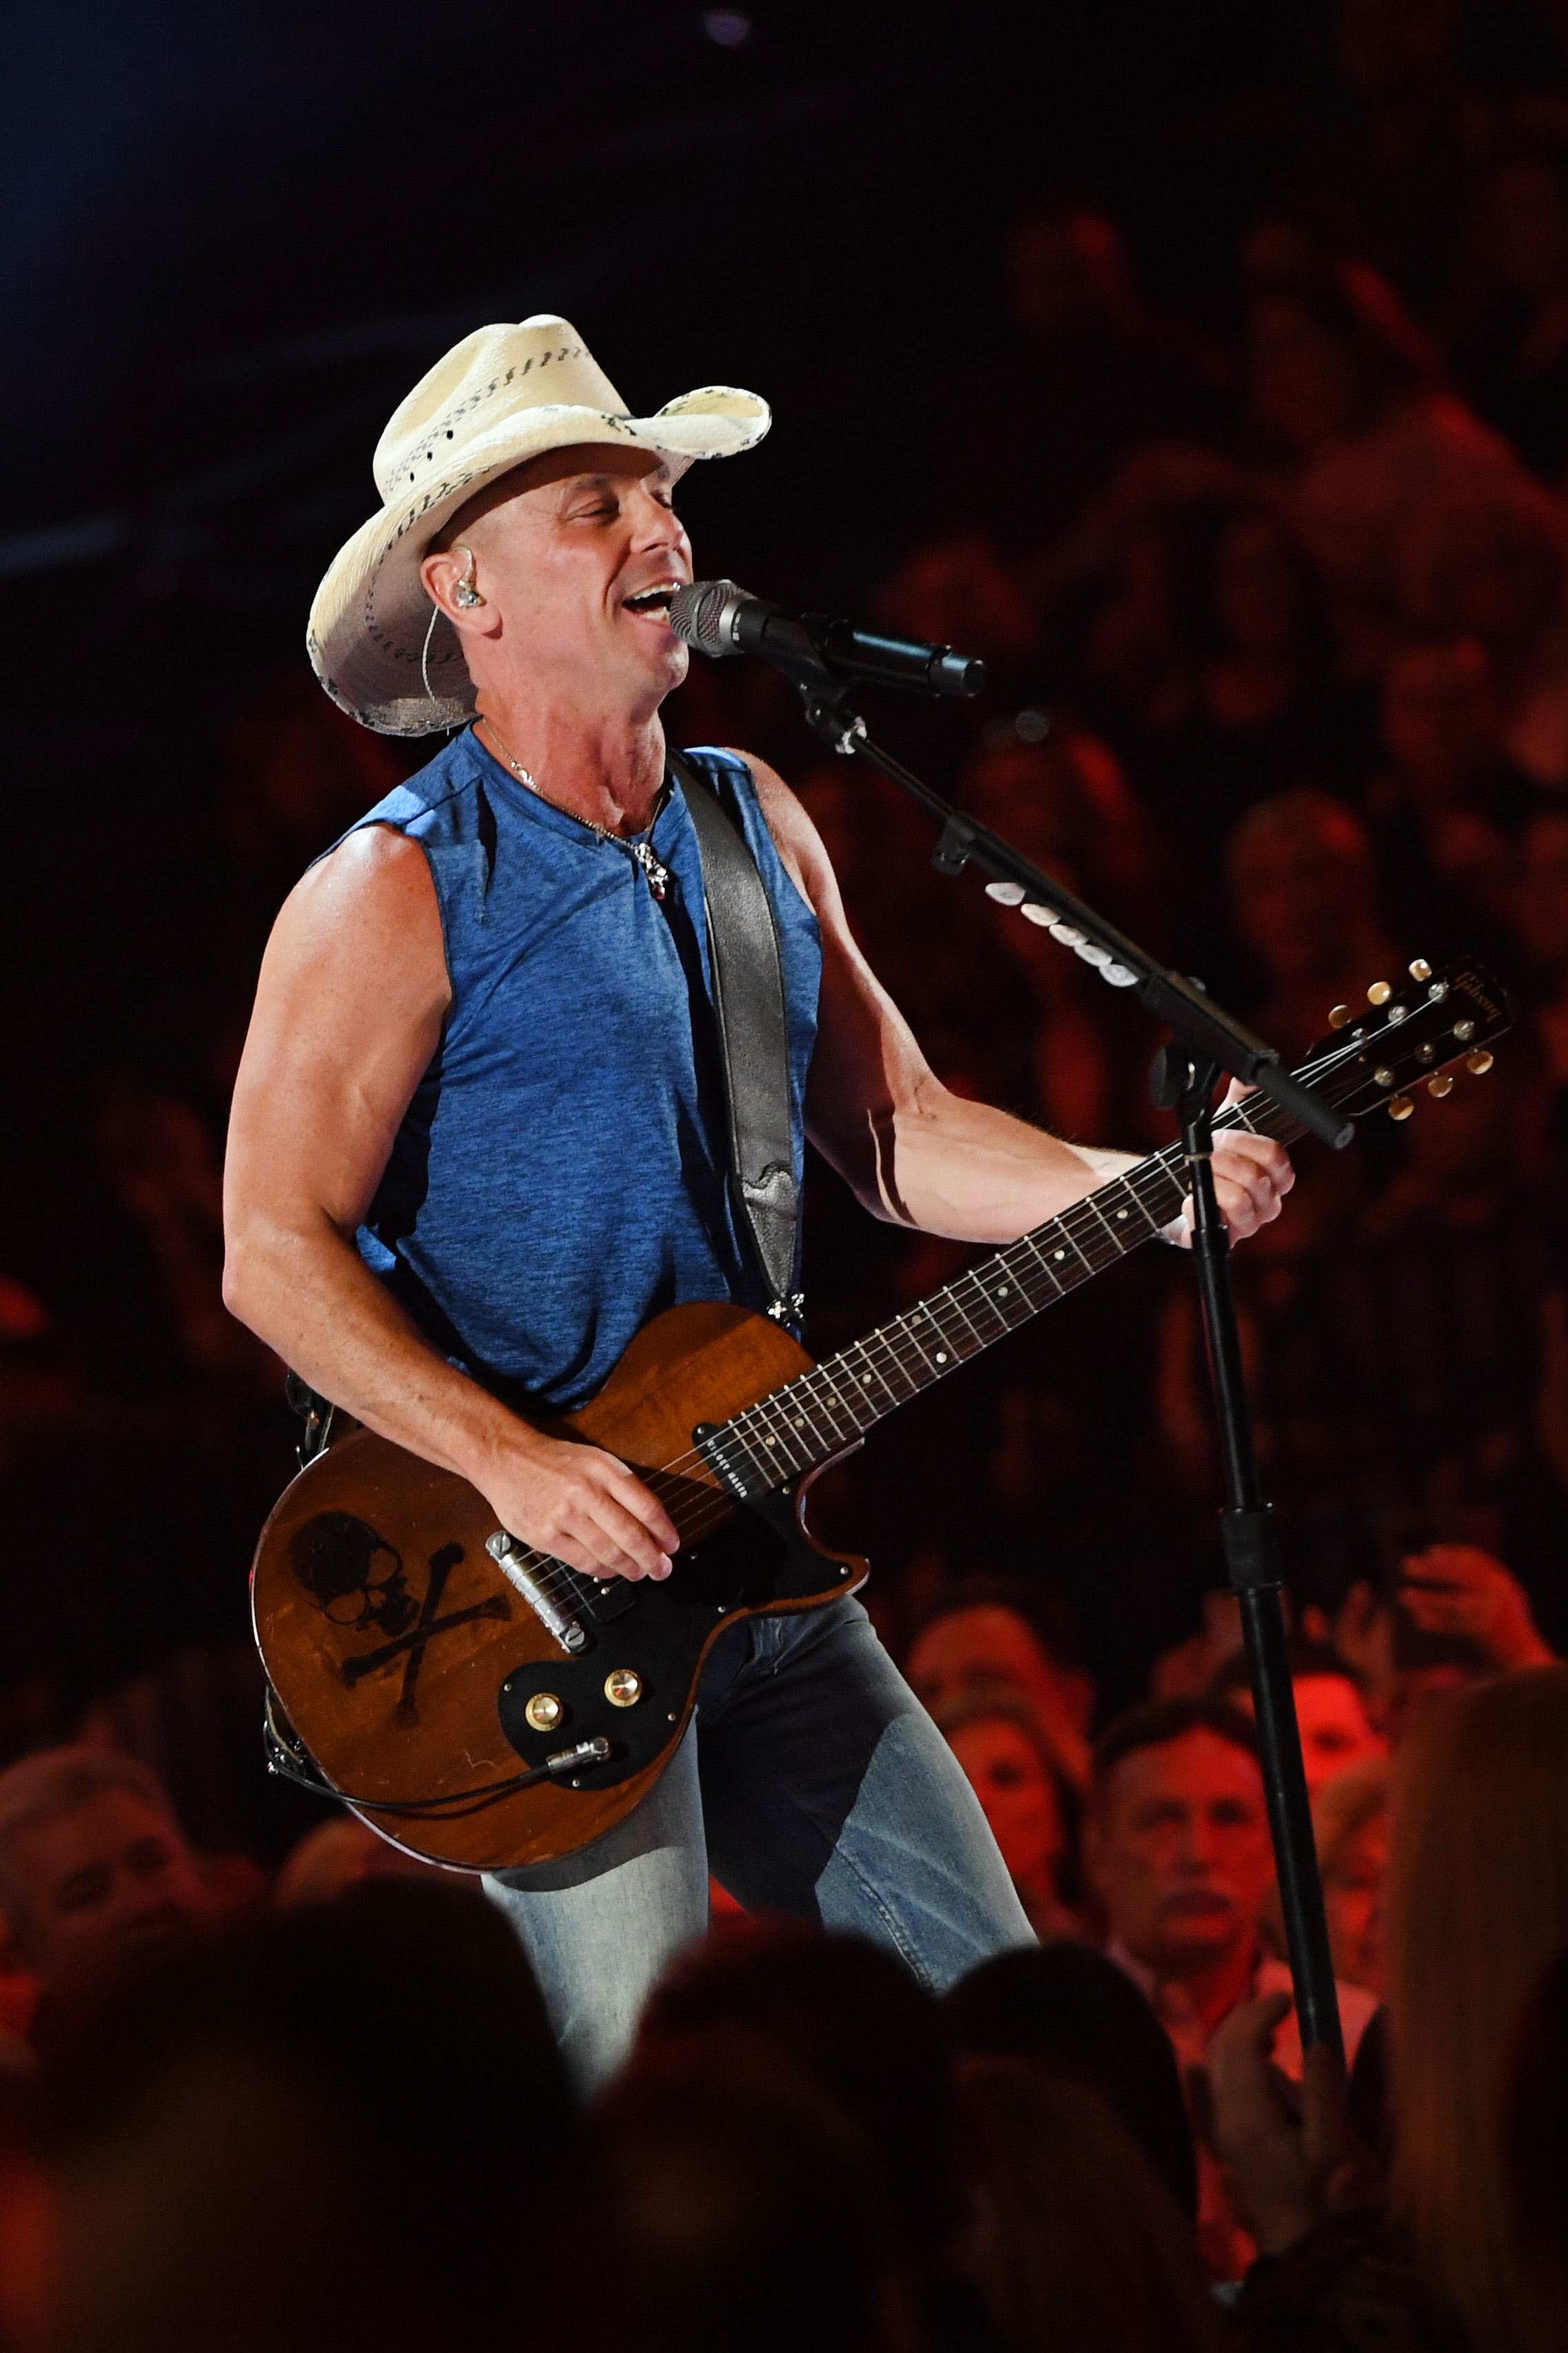 Kenny Chesney performs onstage during the 53rd Academy of Country Music Awards in 2018 in Las Vegas.